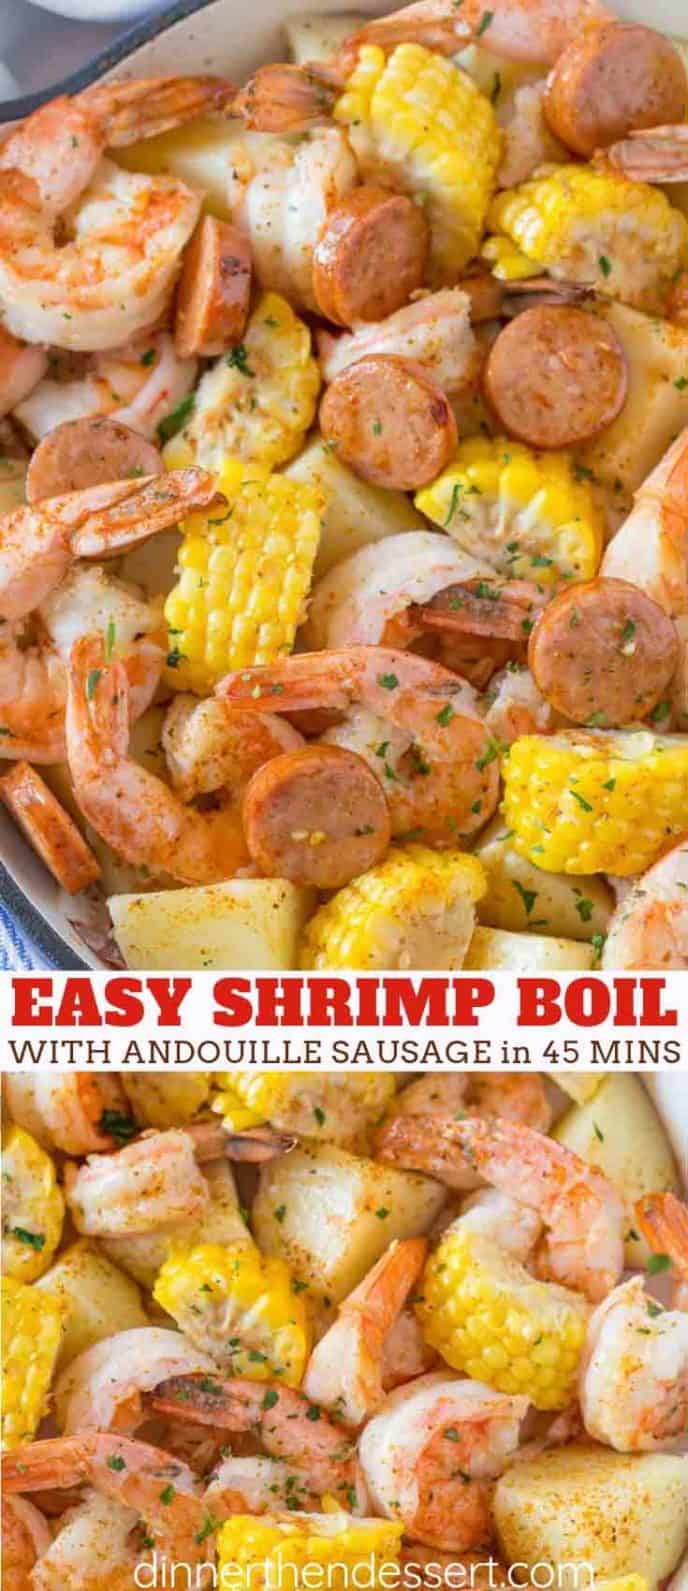 Shrimp and Sausage Boil with Corn and Potatoes